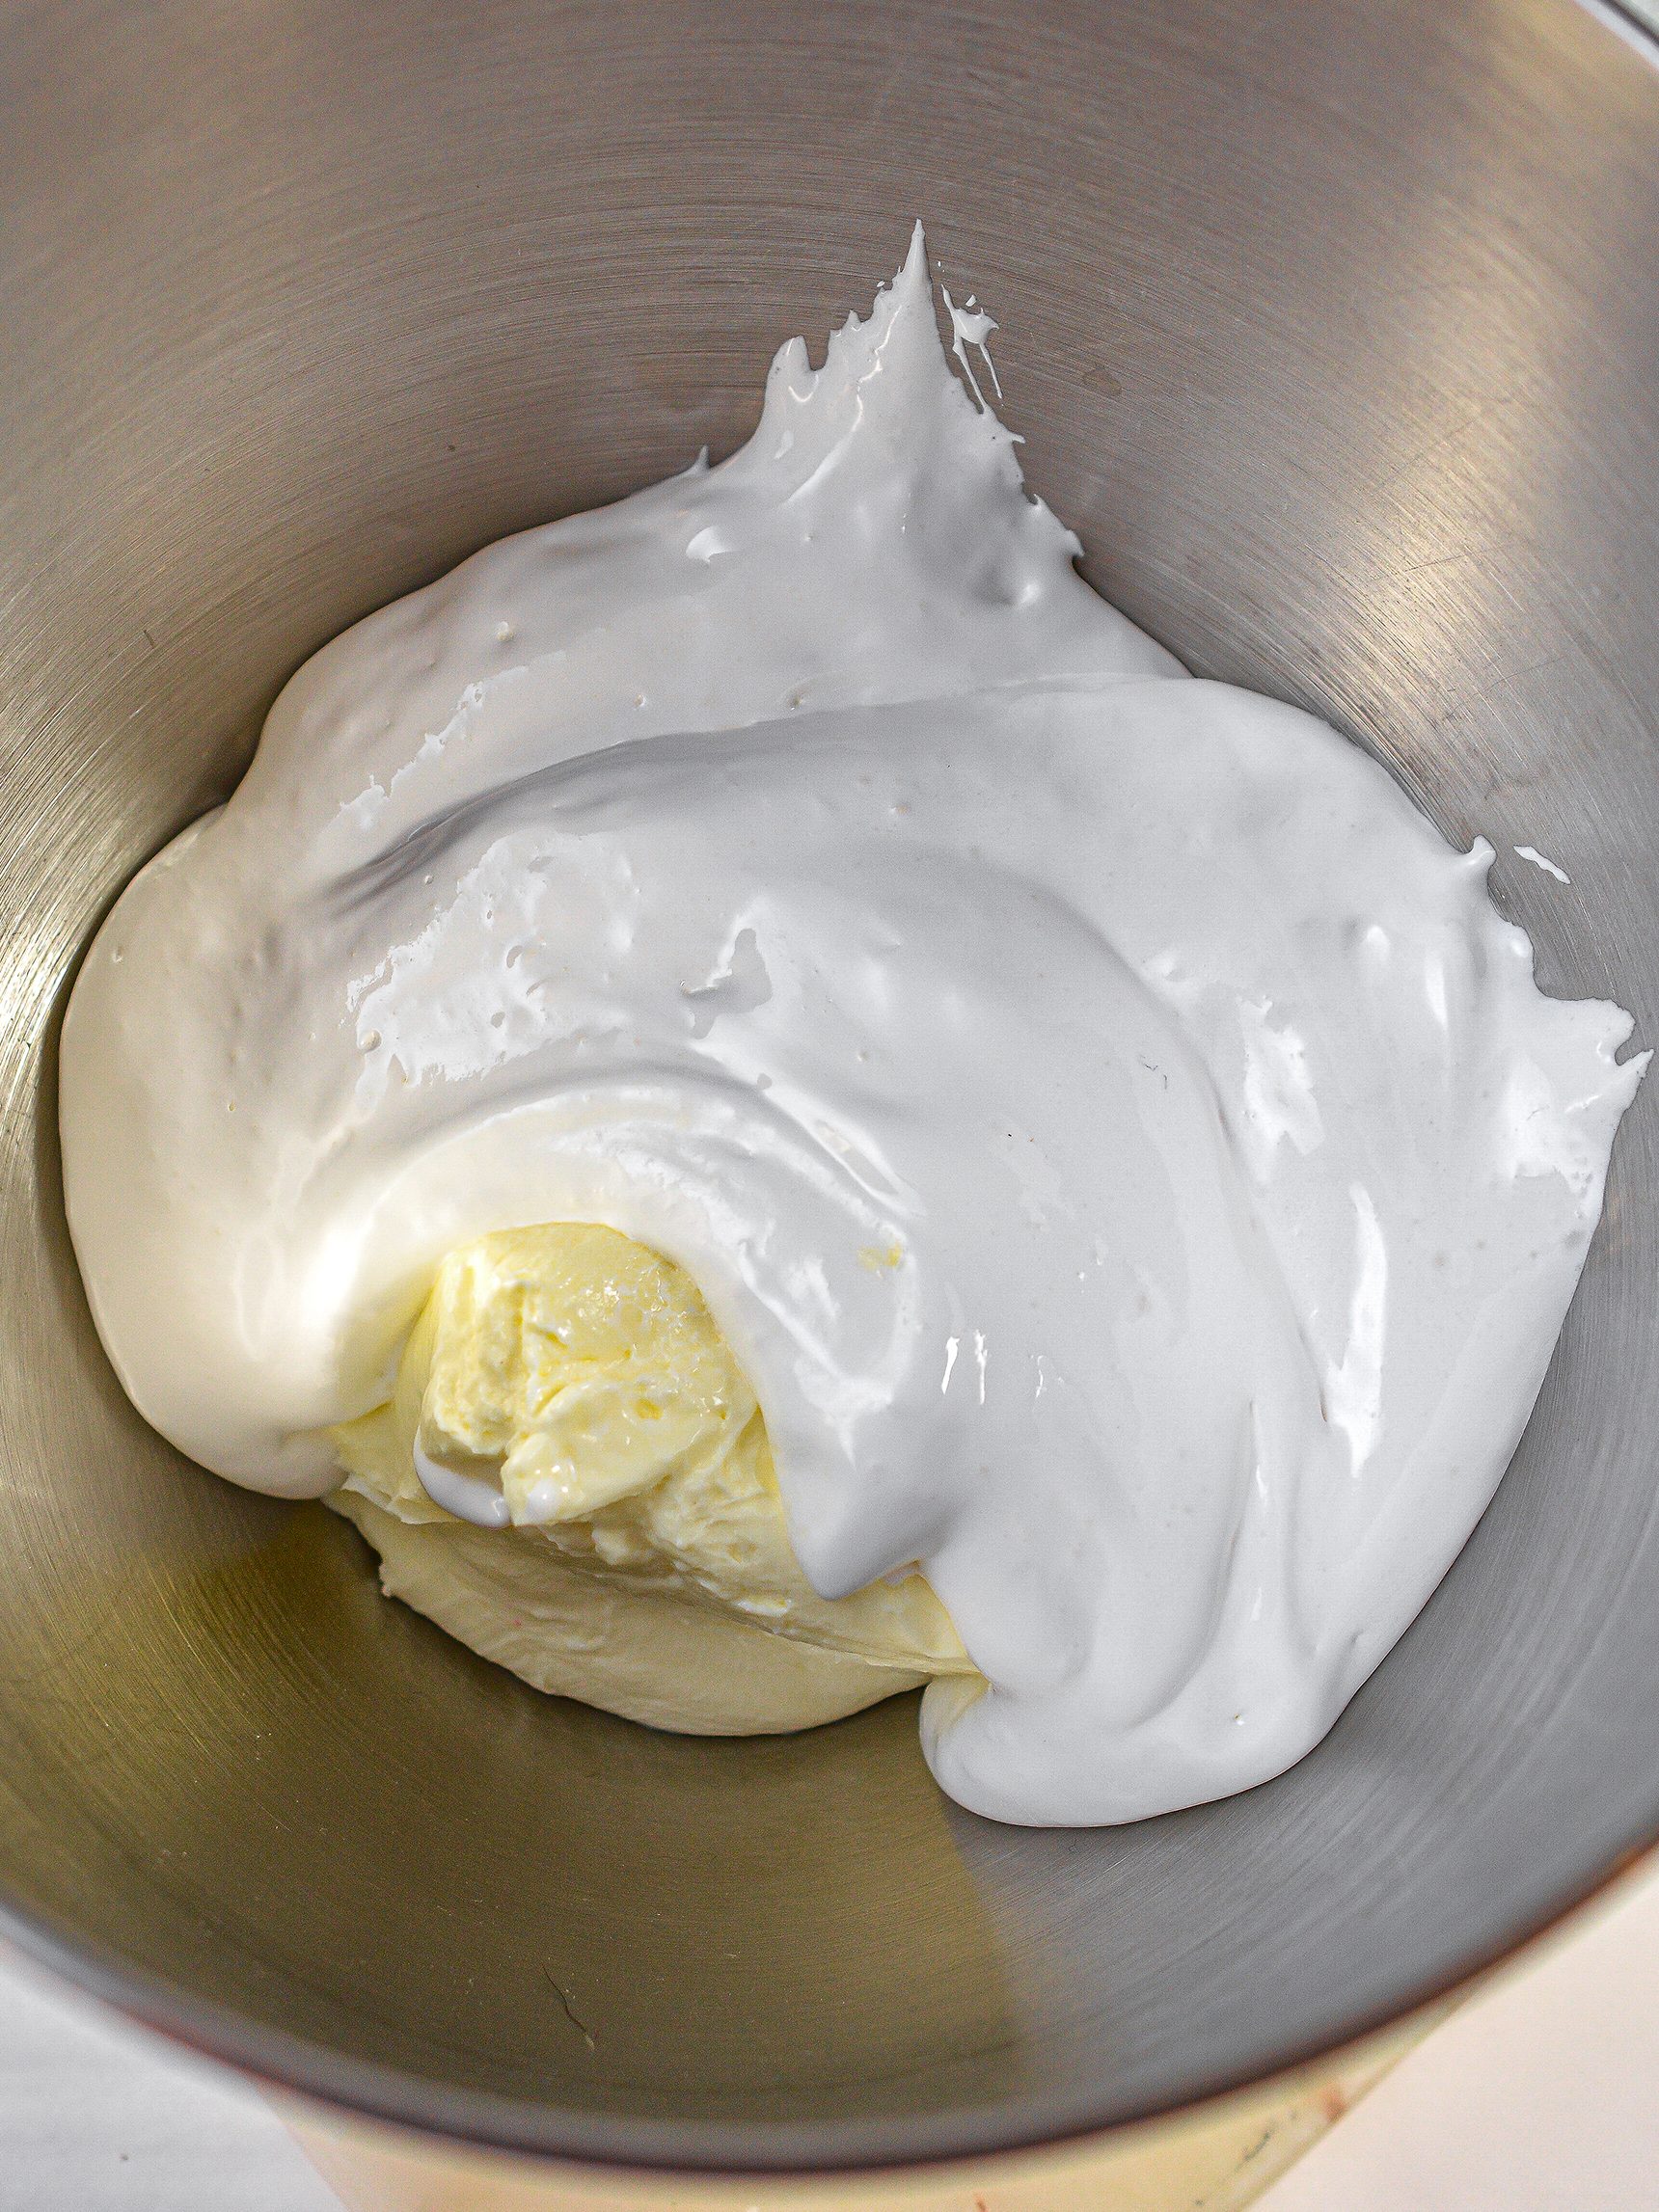 Combine the cream cheese and marshmallow creme in a mixing bowl, beating on high until creamy and well incorporated.